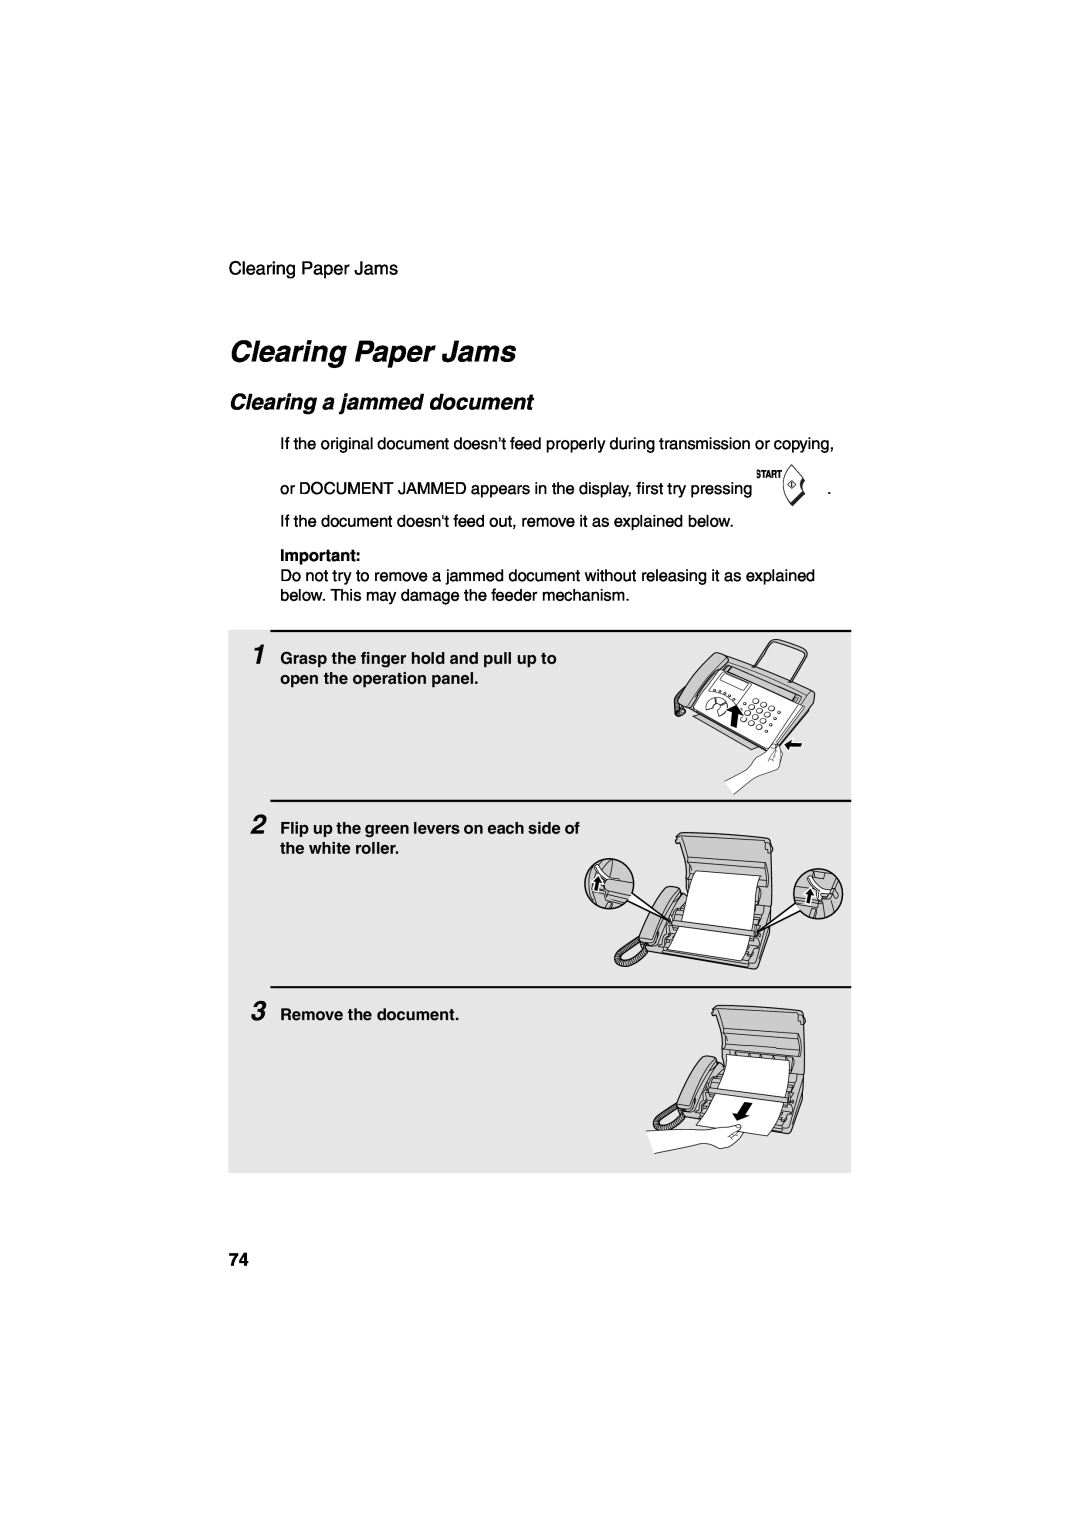 Sharp FO-51 Clearing Paper Jams, Clearing a jammed document, Grasp the finger hold and pull up to open the operation panel 